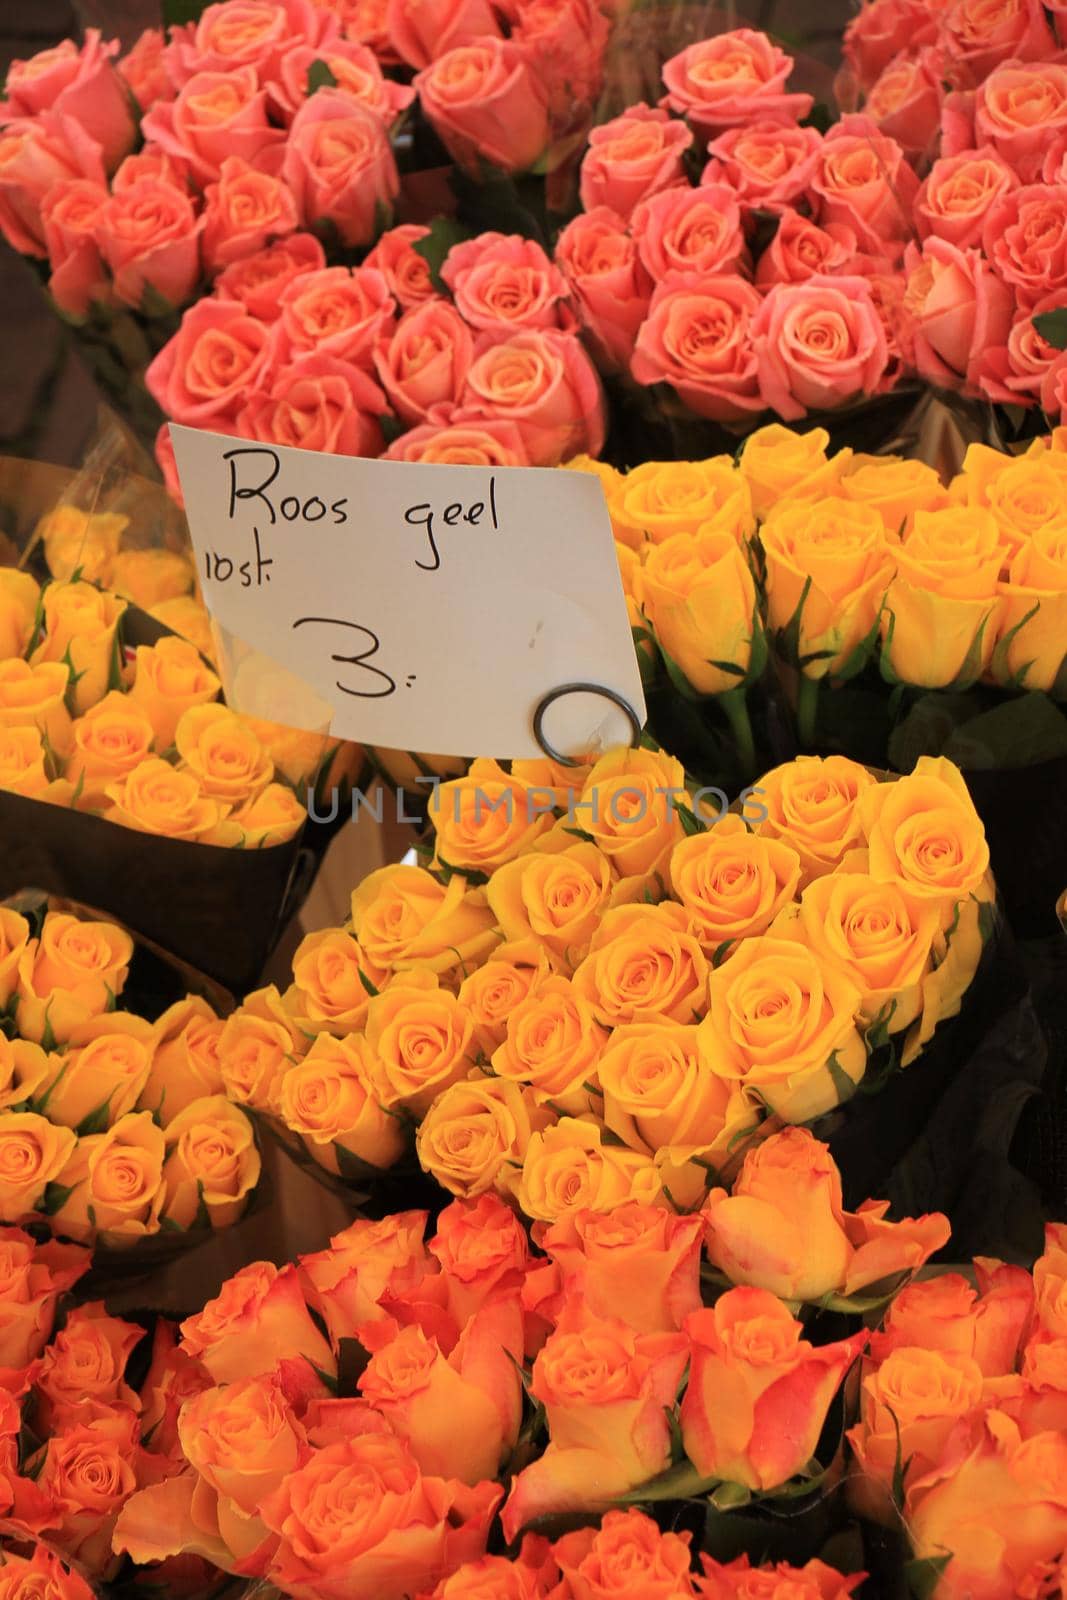 Roses in various colors at a market (text on tags: names and prices in Dutch)